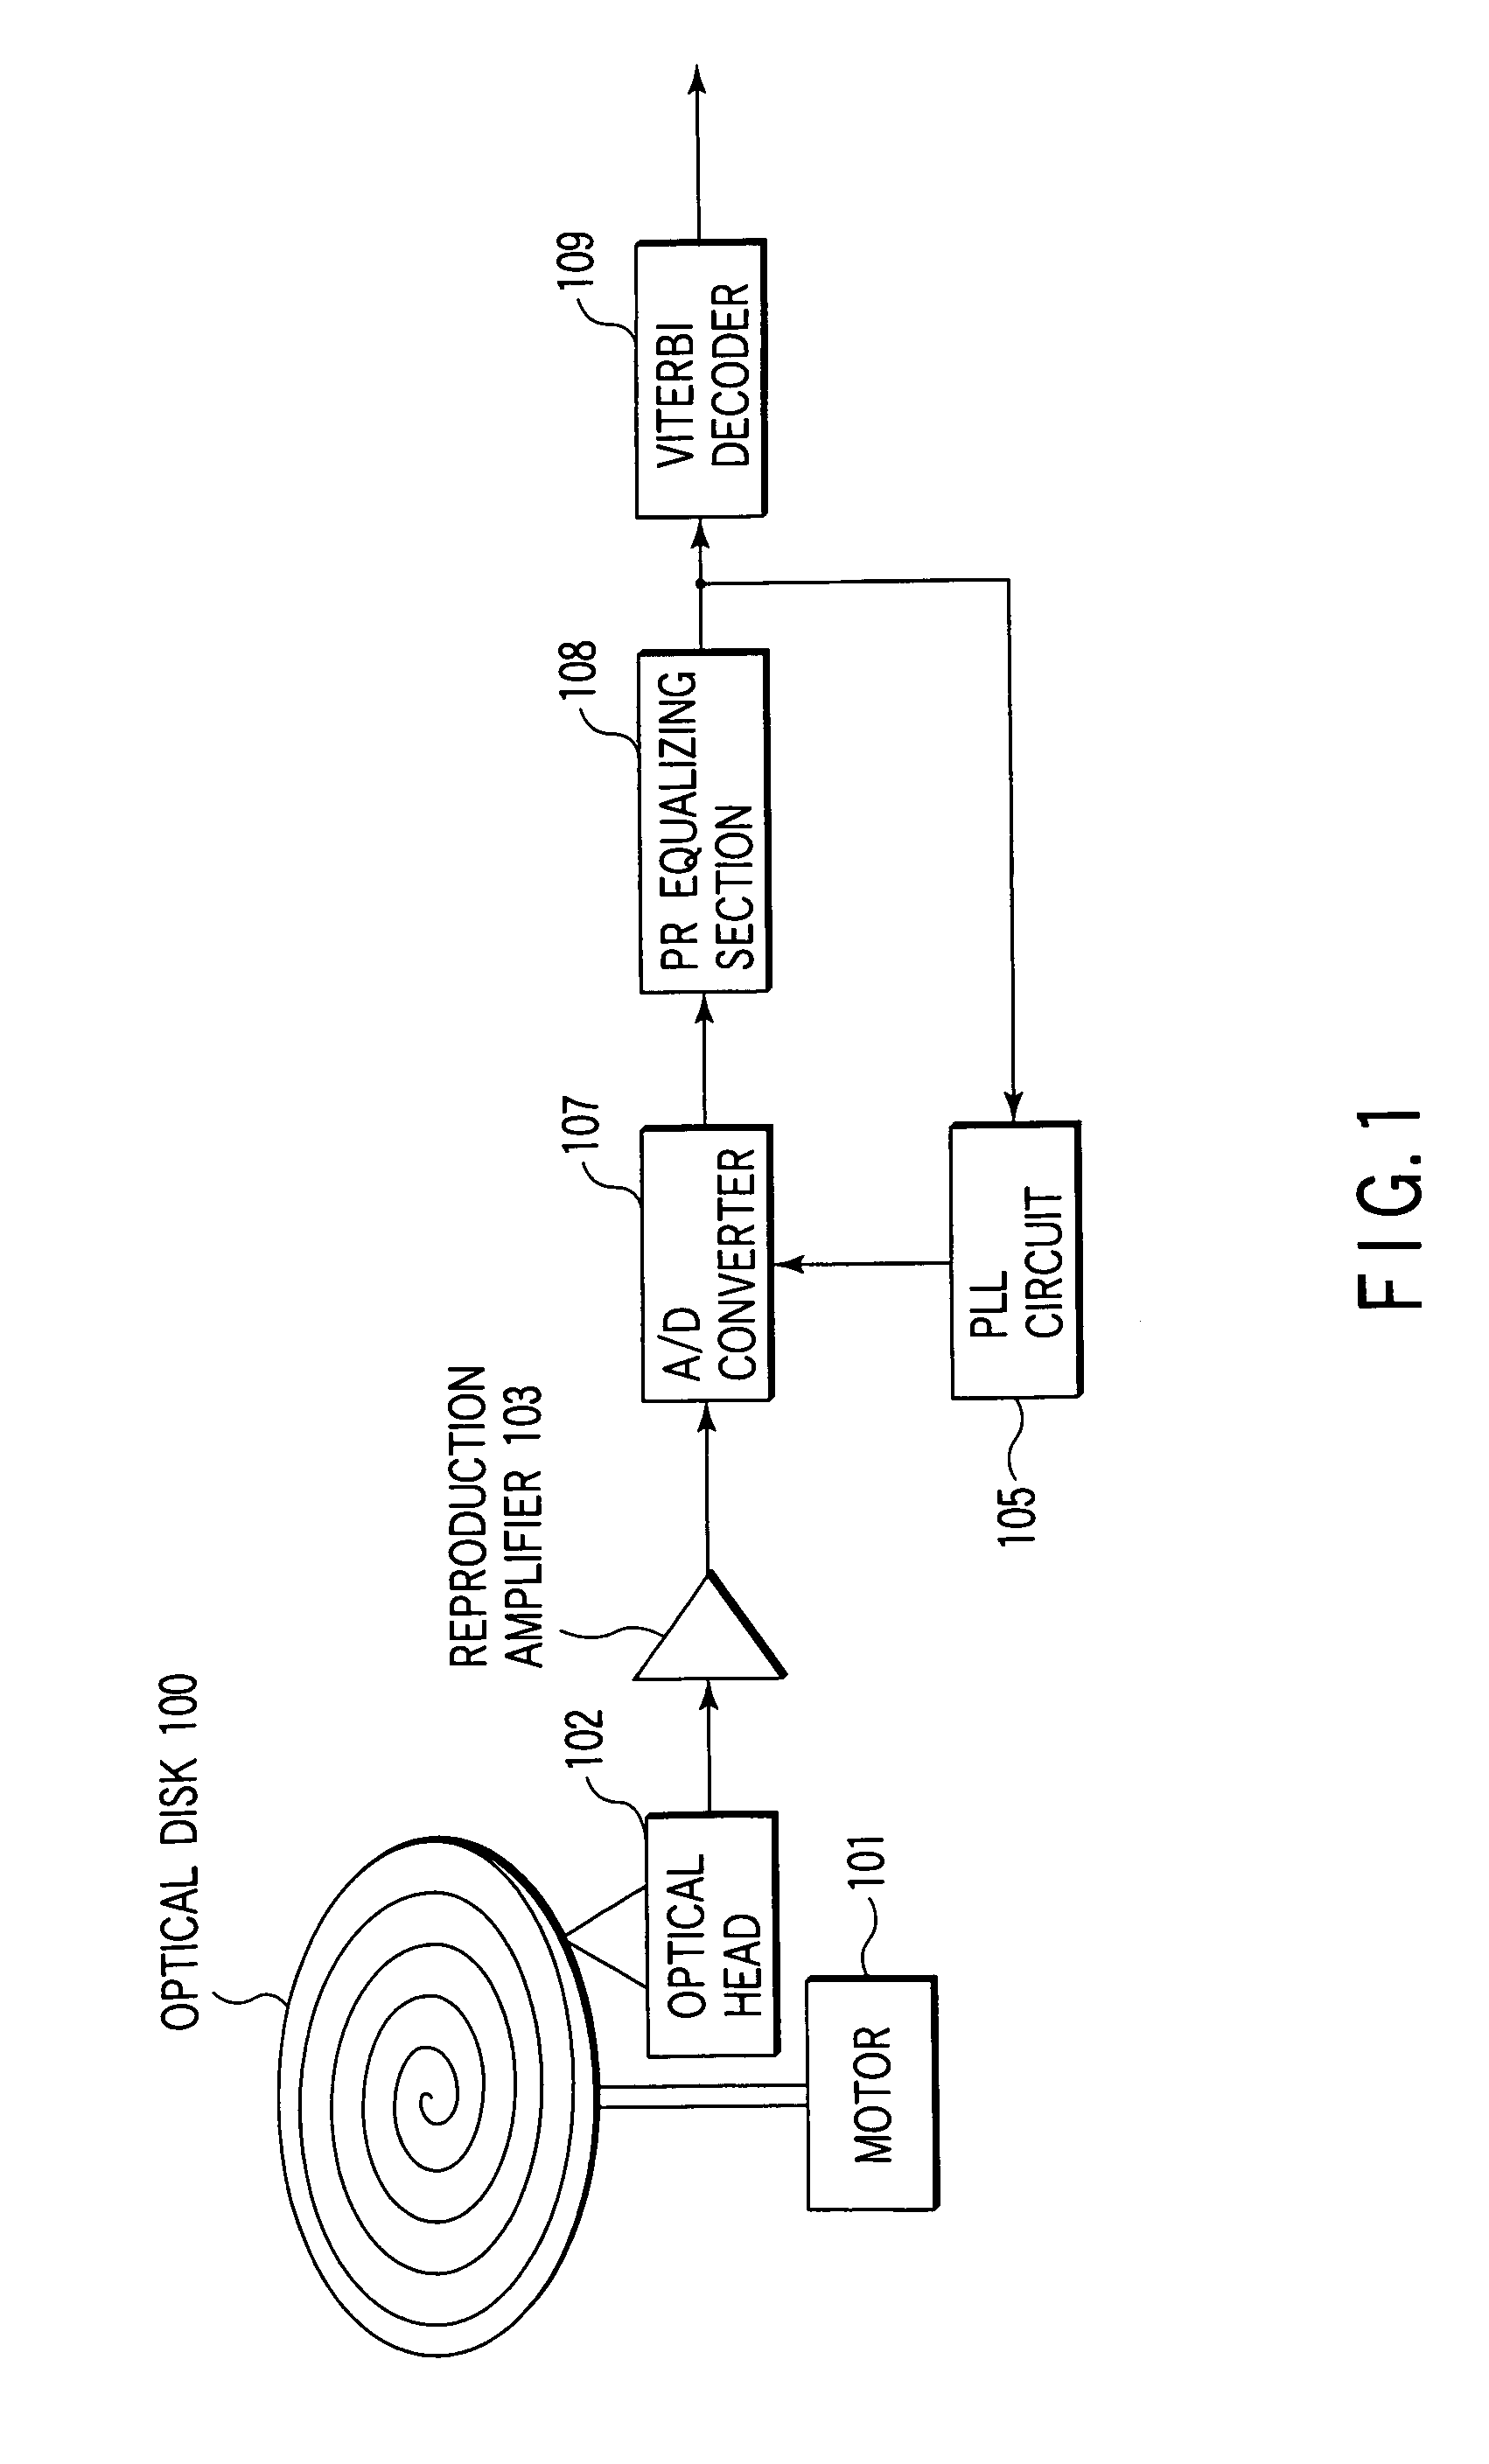 Reproduction signal evaluation method